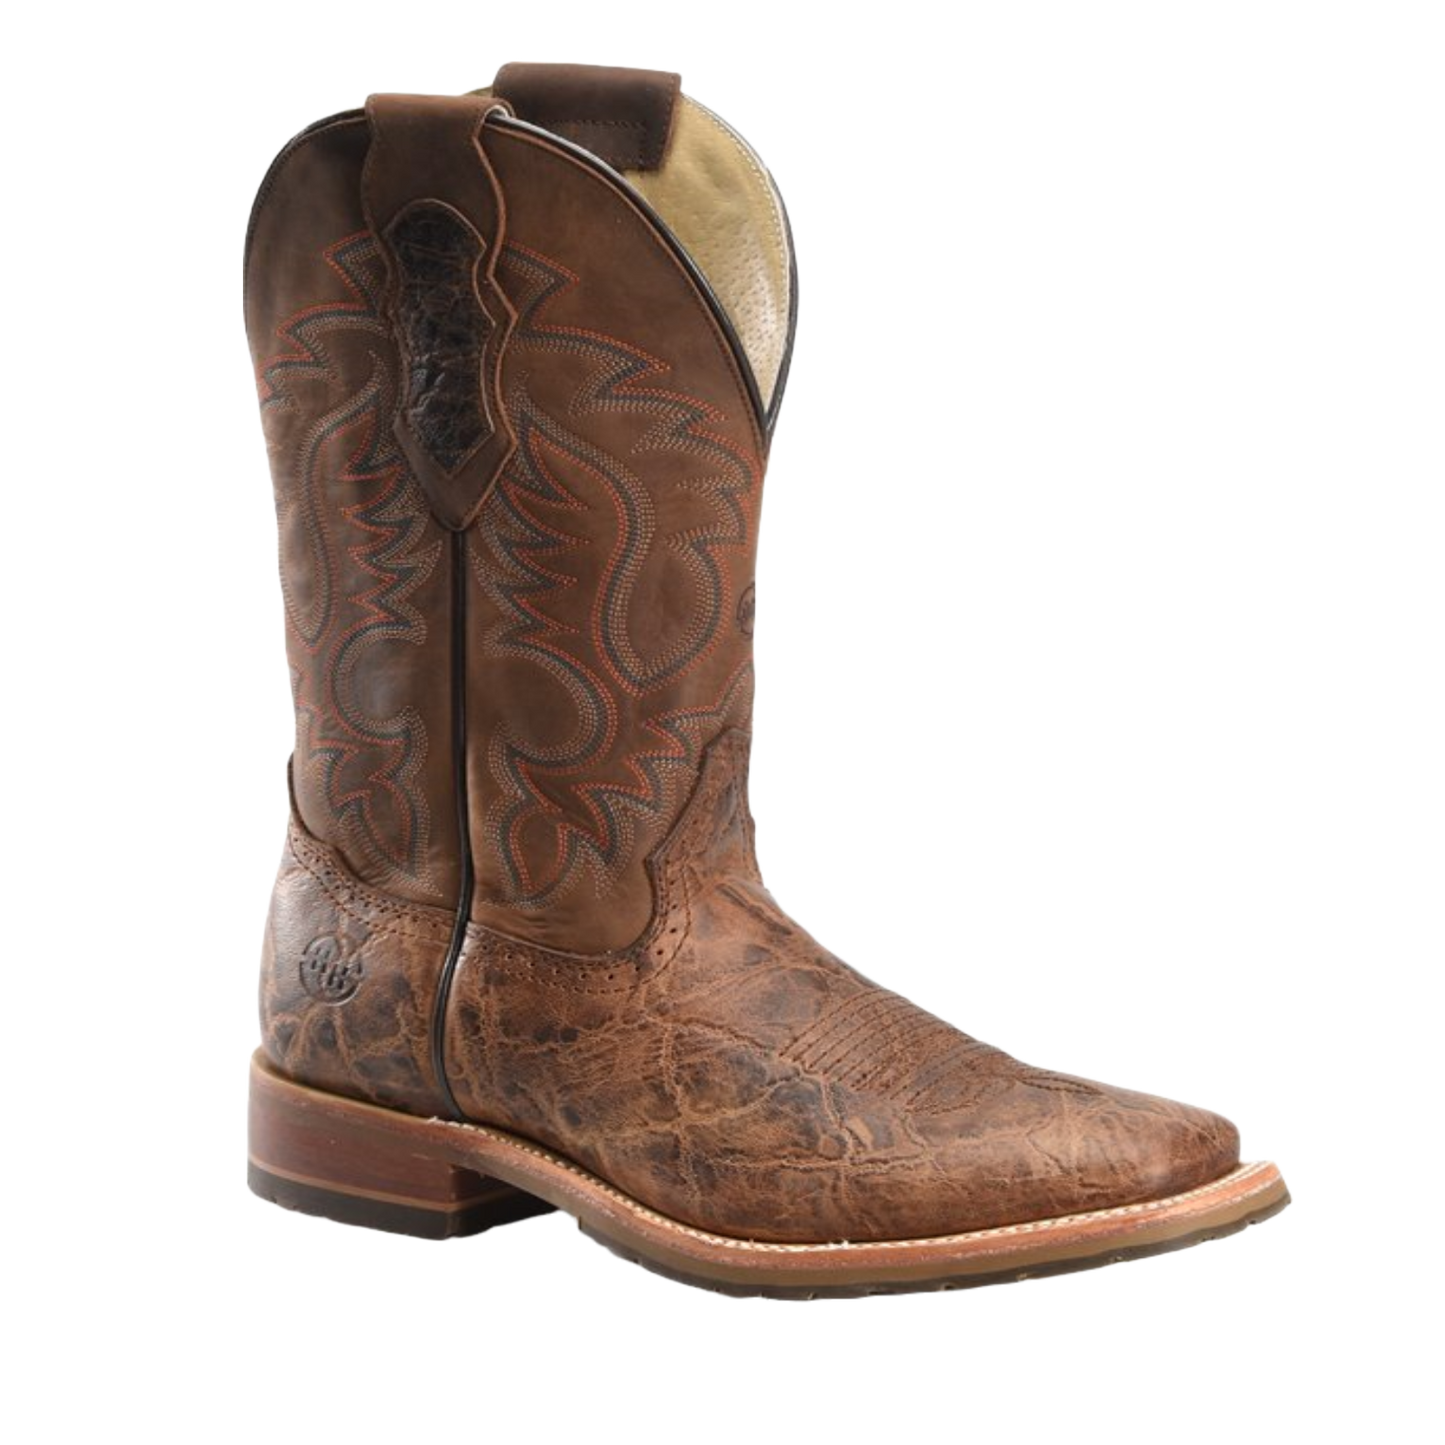 Double H® Men's Bregman 12" Wide Square Toe Brown Work Boots DH8645